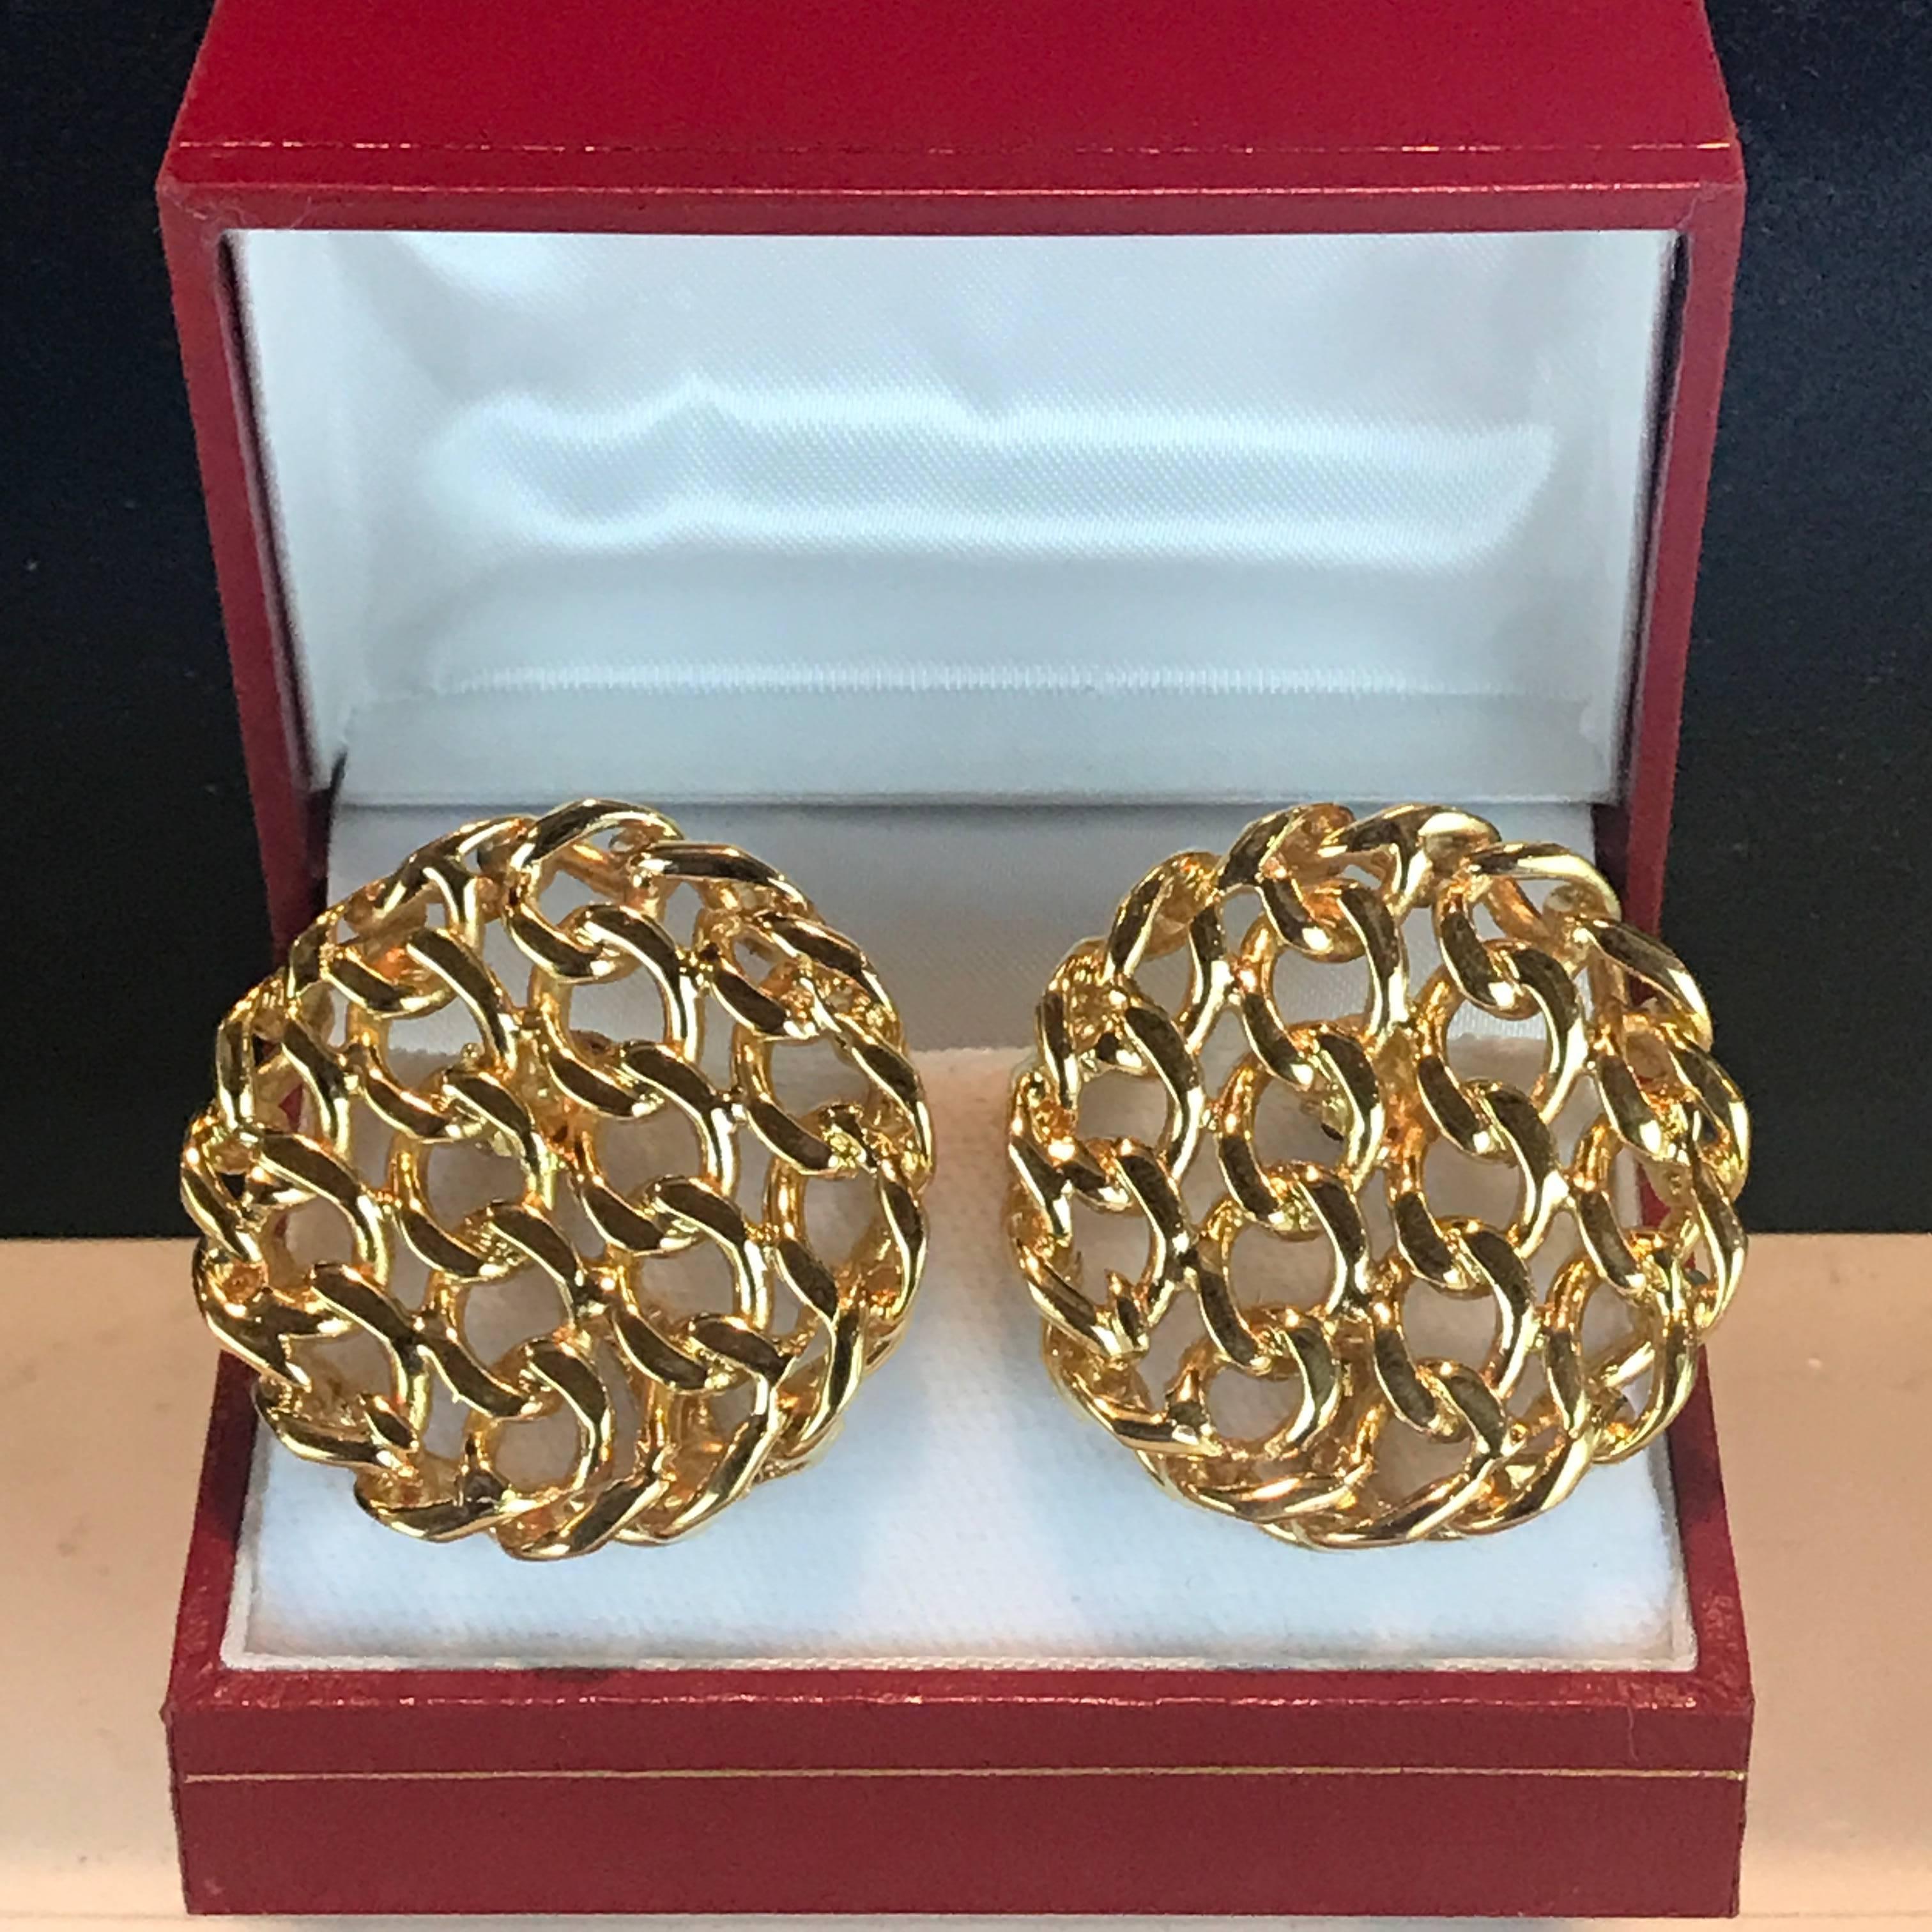 Chanel signature chain link earrings
Made in: France
Color: Gold
Materials: Gold plate
Closure: Clip back closure
Stamp: Chanel
Overall condition: Very good pre-owned condition
Includes: Chanel box
Measurements: 1.25